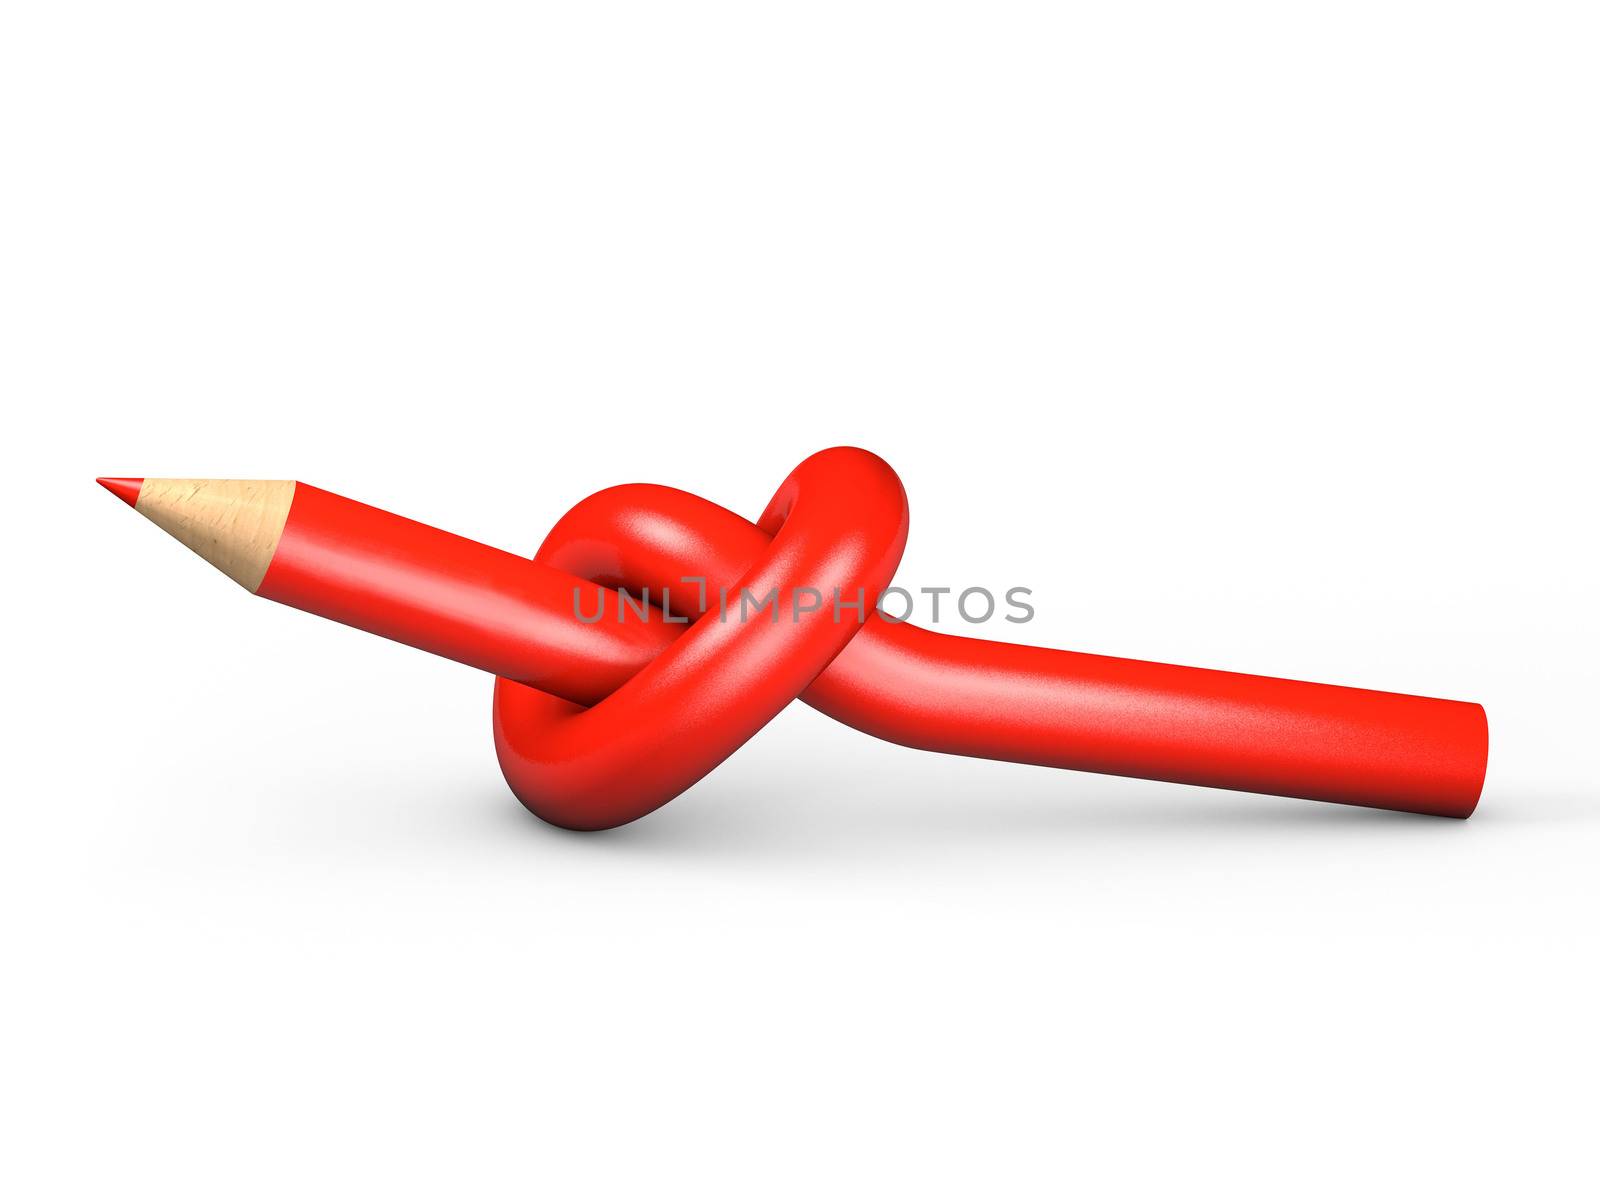 Red pencil tied in a knot on a white background